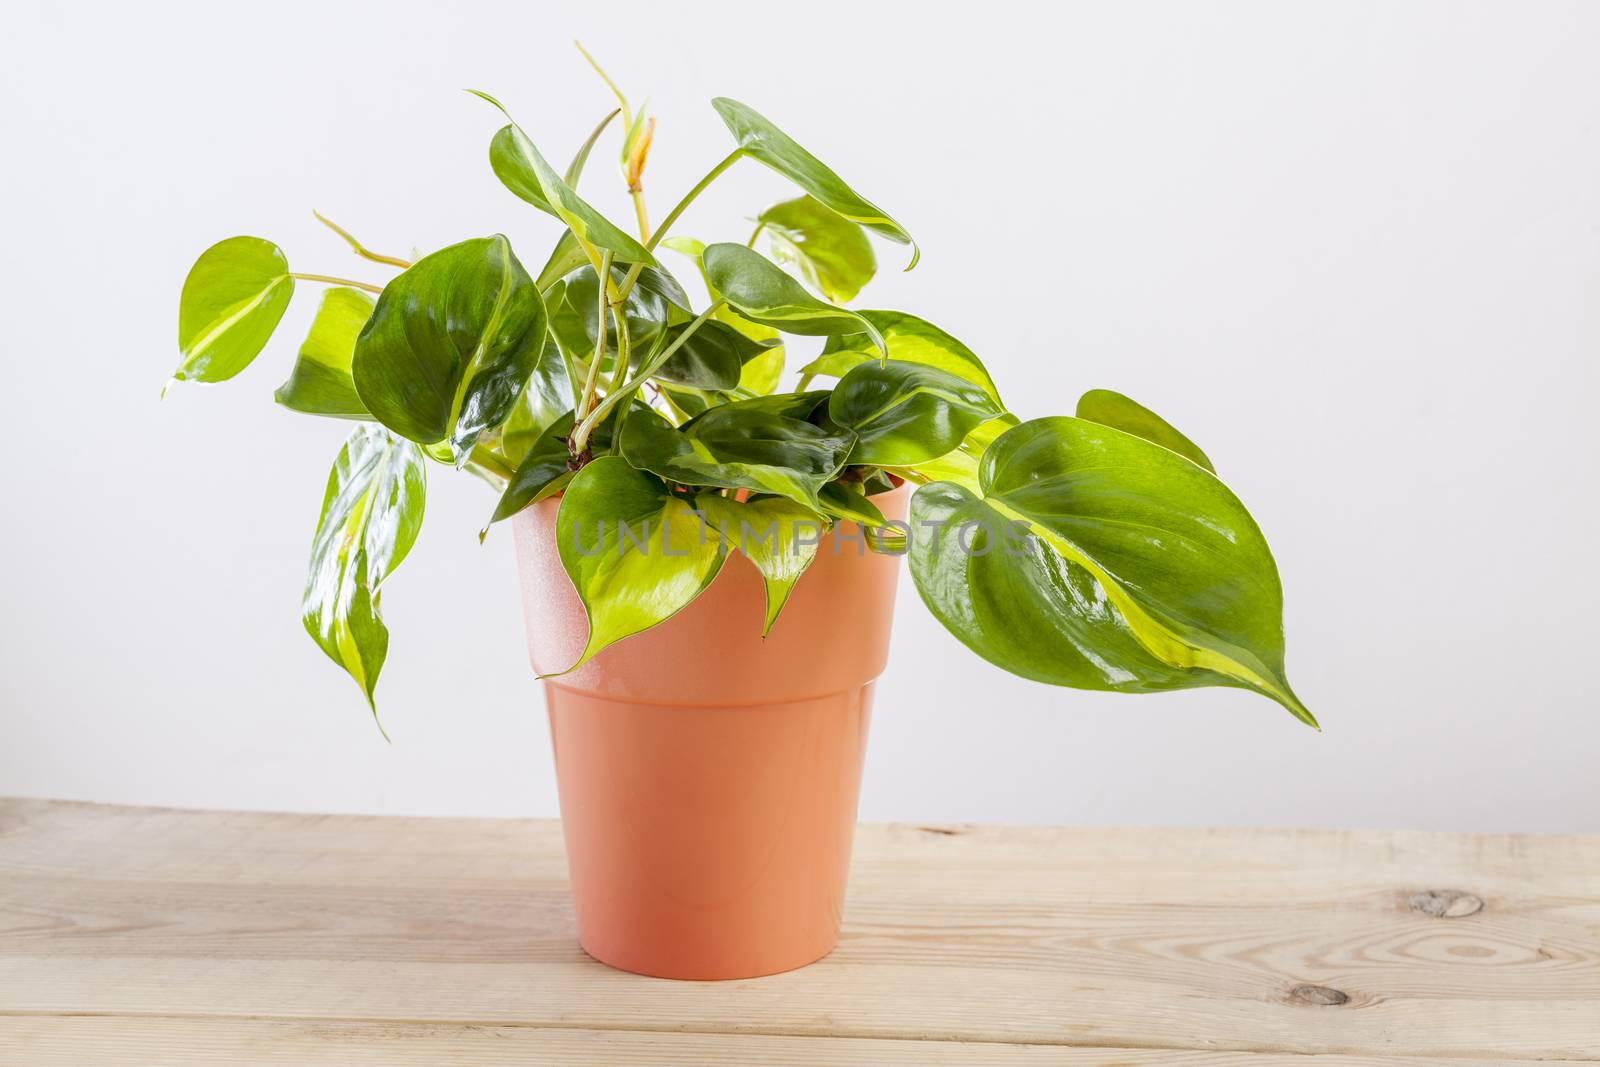 Philodendron Brasilia with variegated green leaves in flowerpot on wooden background.